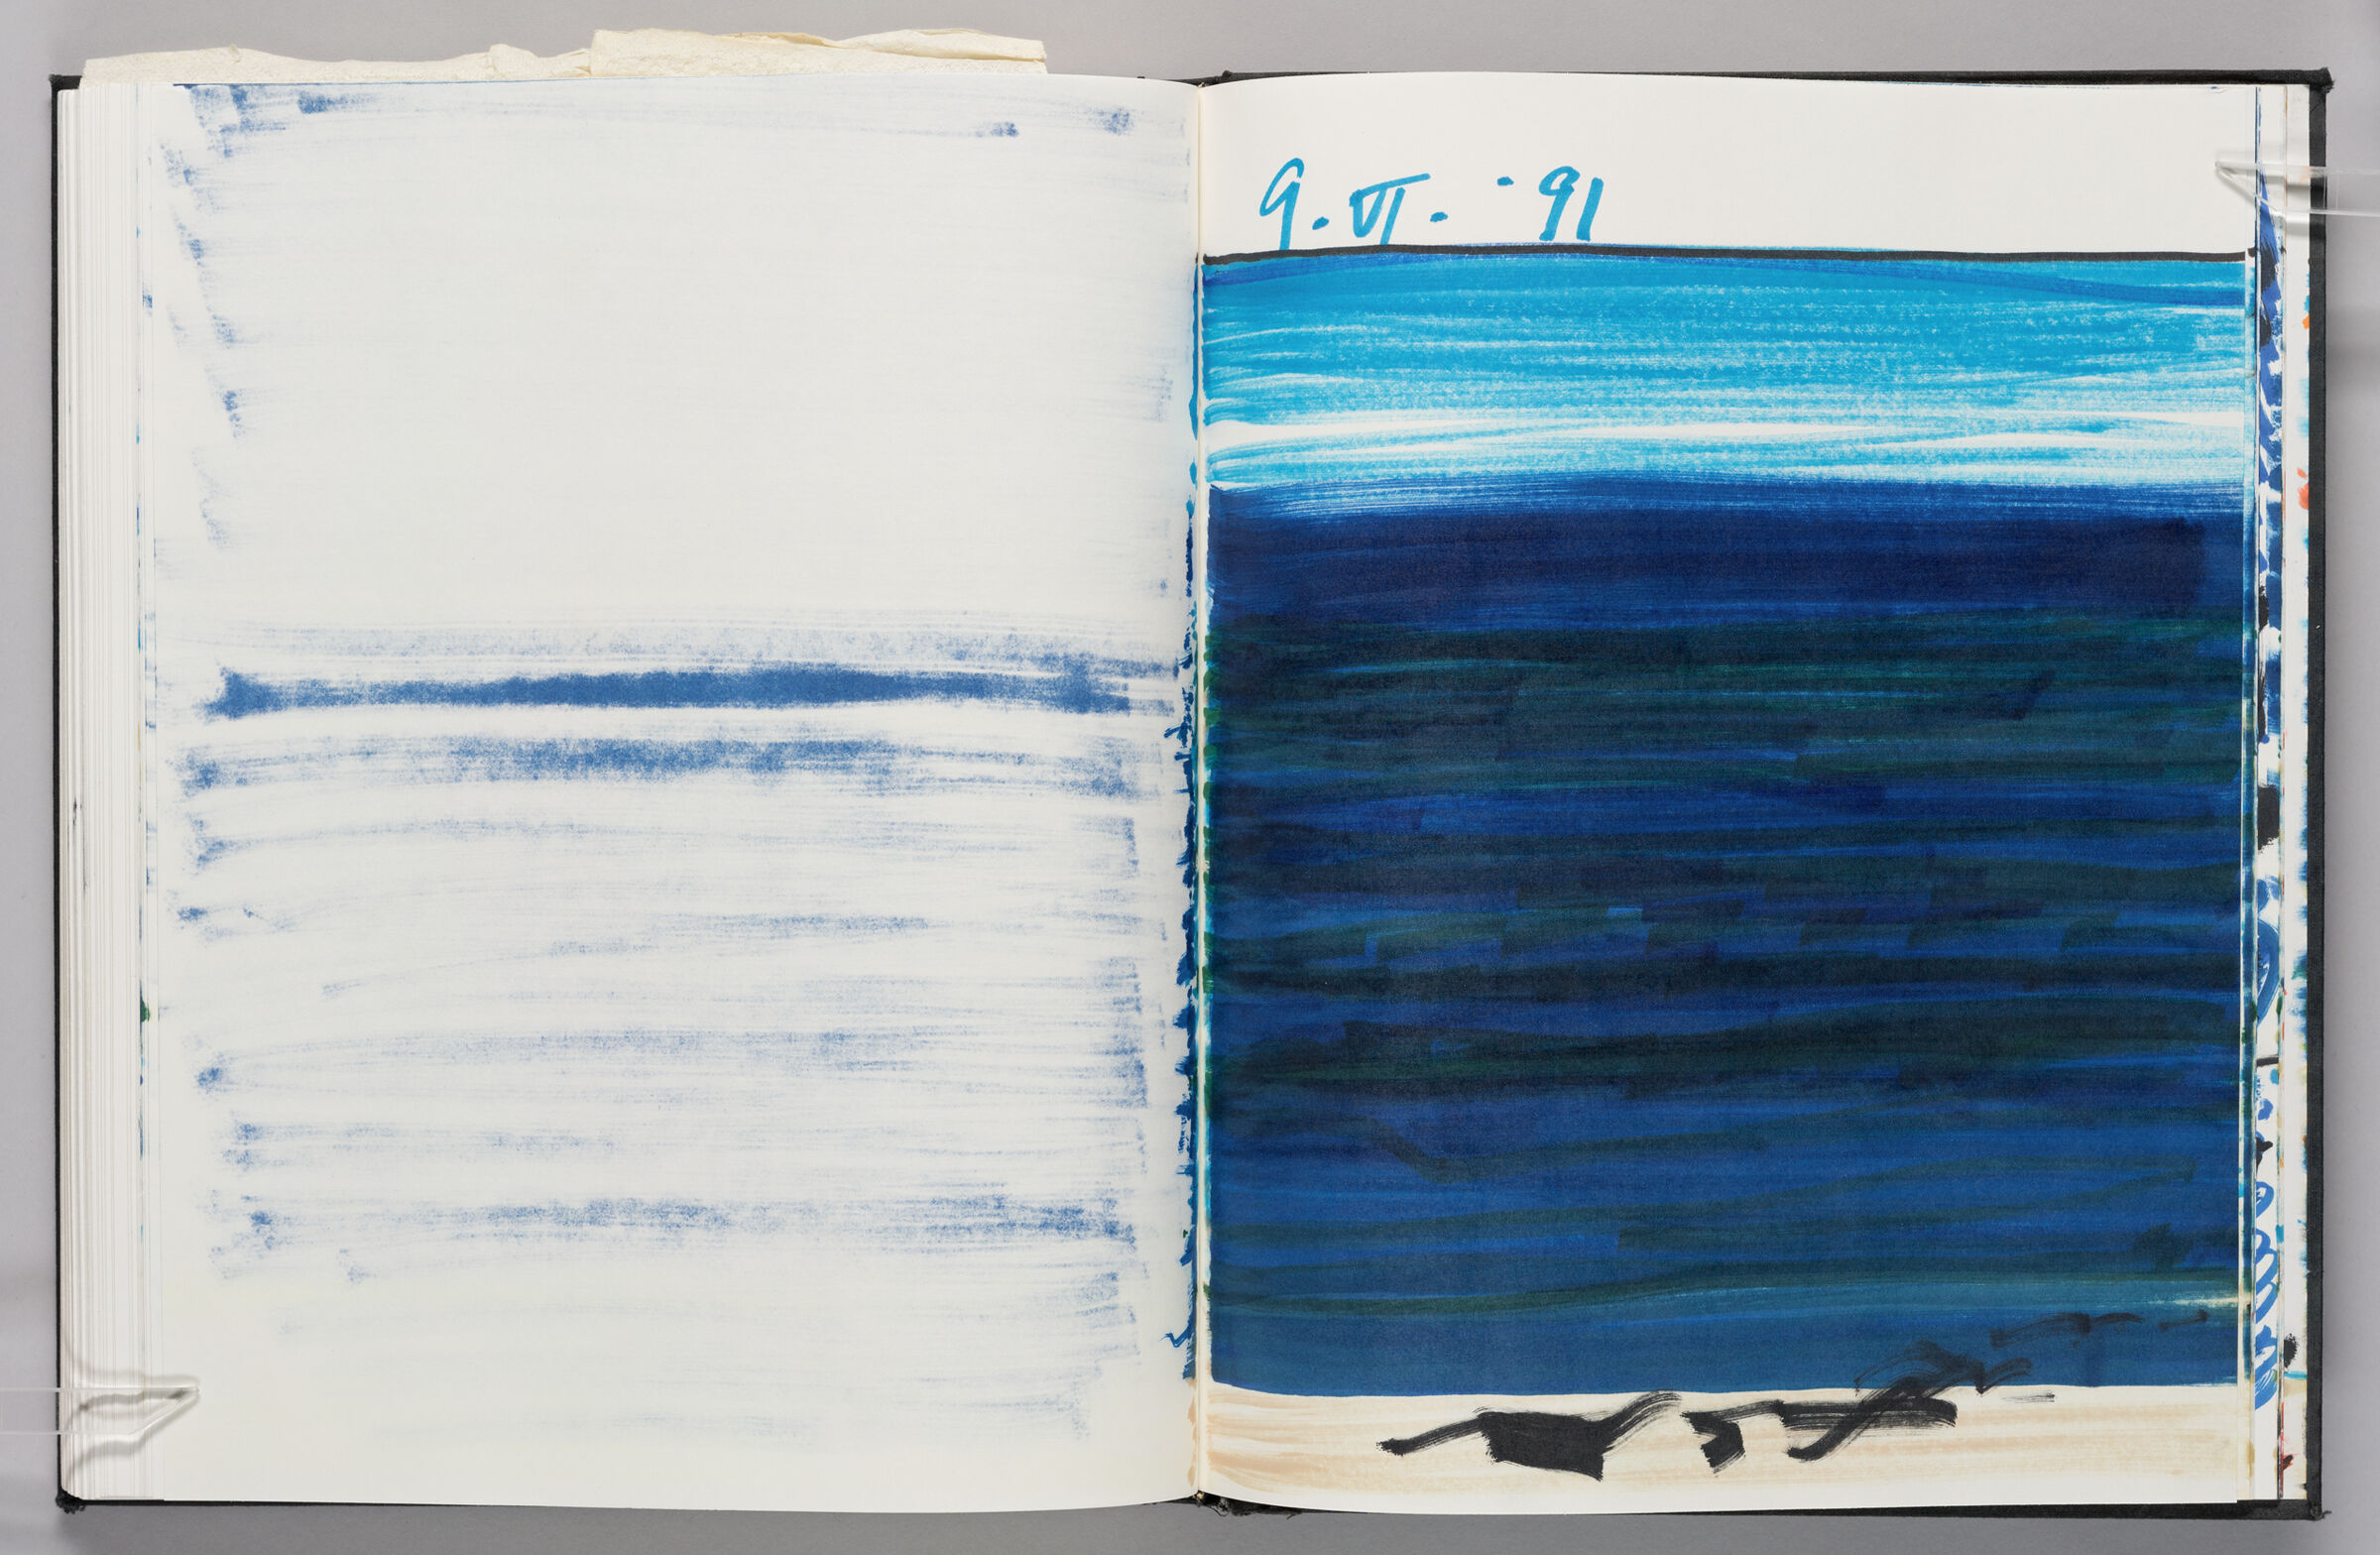 Untitled (Bleed-Through Of Previous Page, Left Page); Untitled (Beach Scene, Right Page)